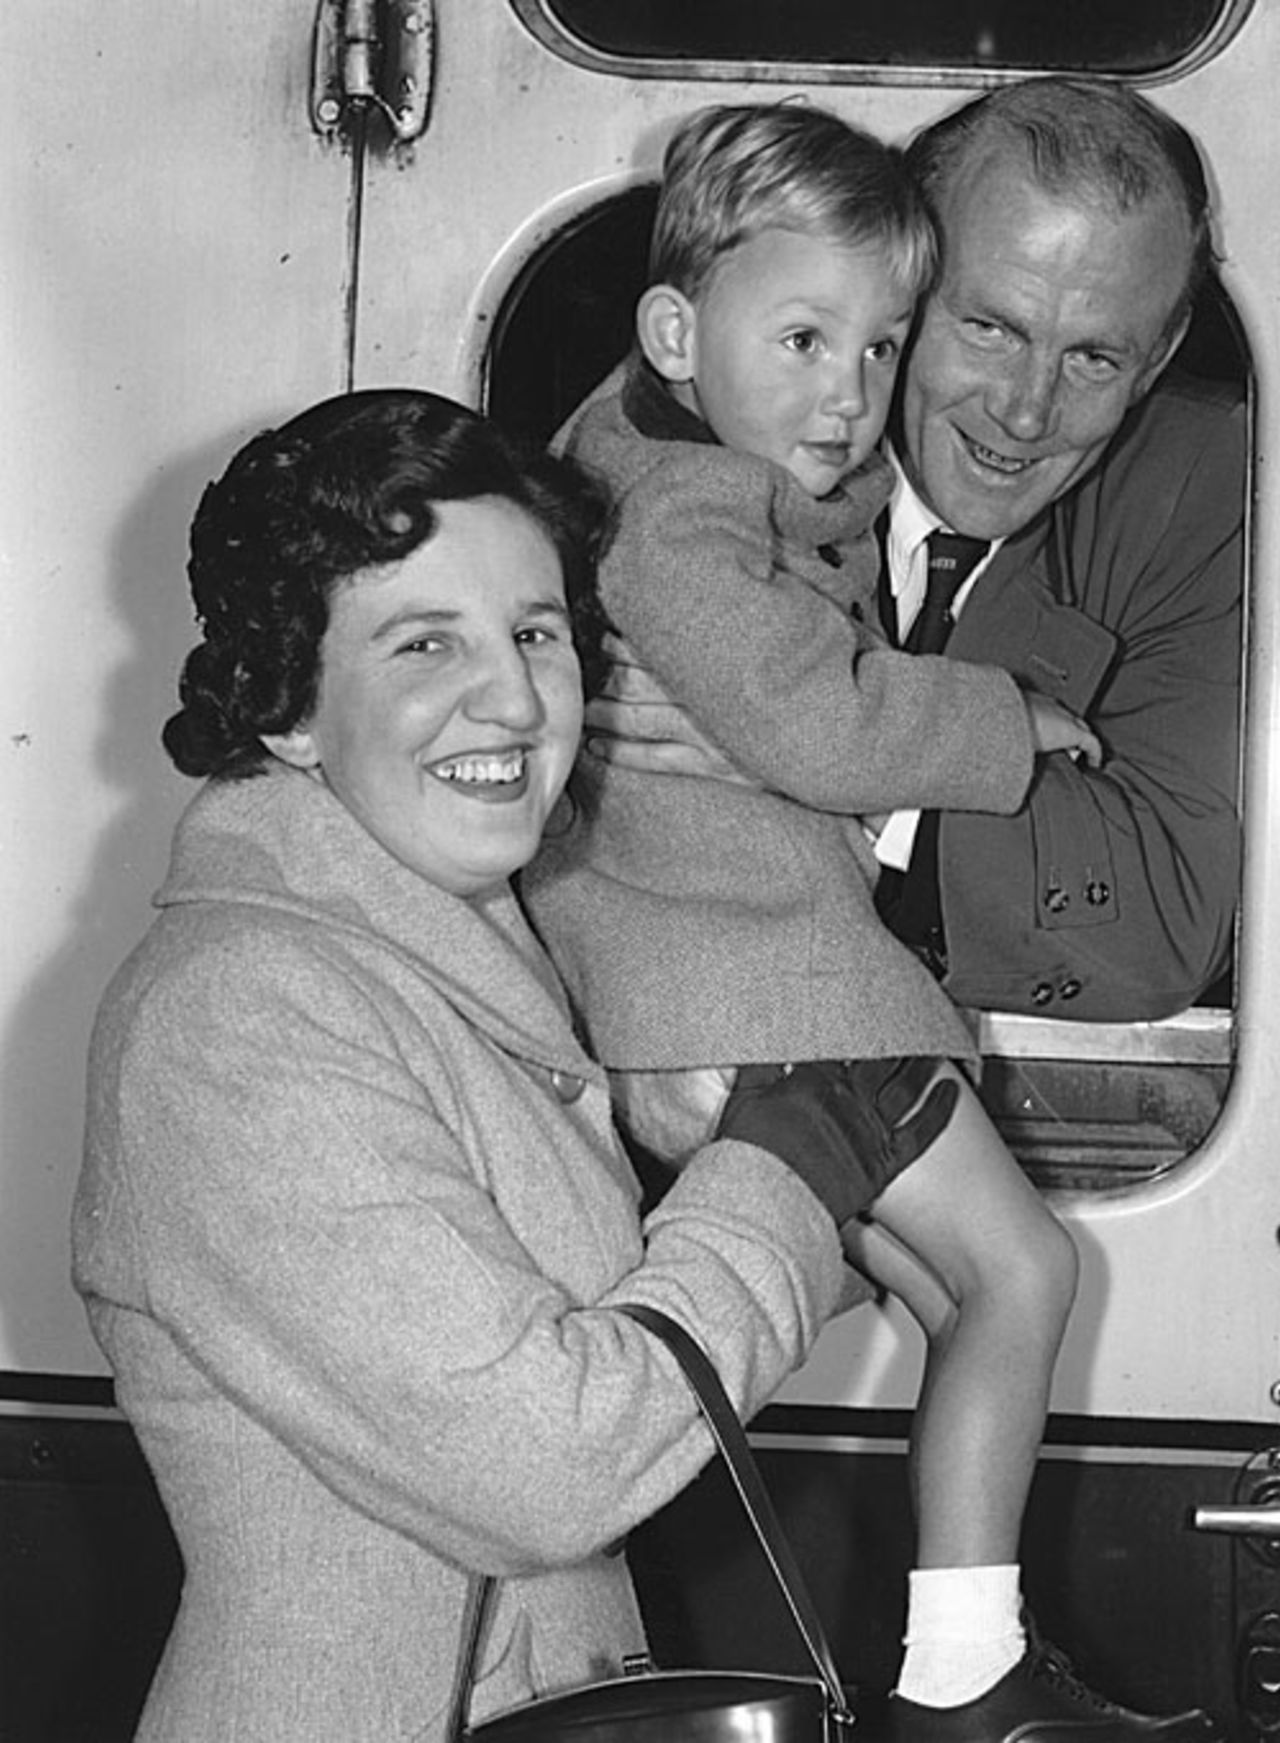 Tony Lock poses with his wife Audrey and son Graham before leaving for South Africa, Waterloo, October 4, 1956